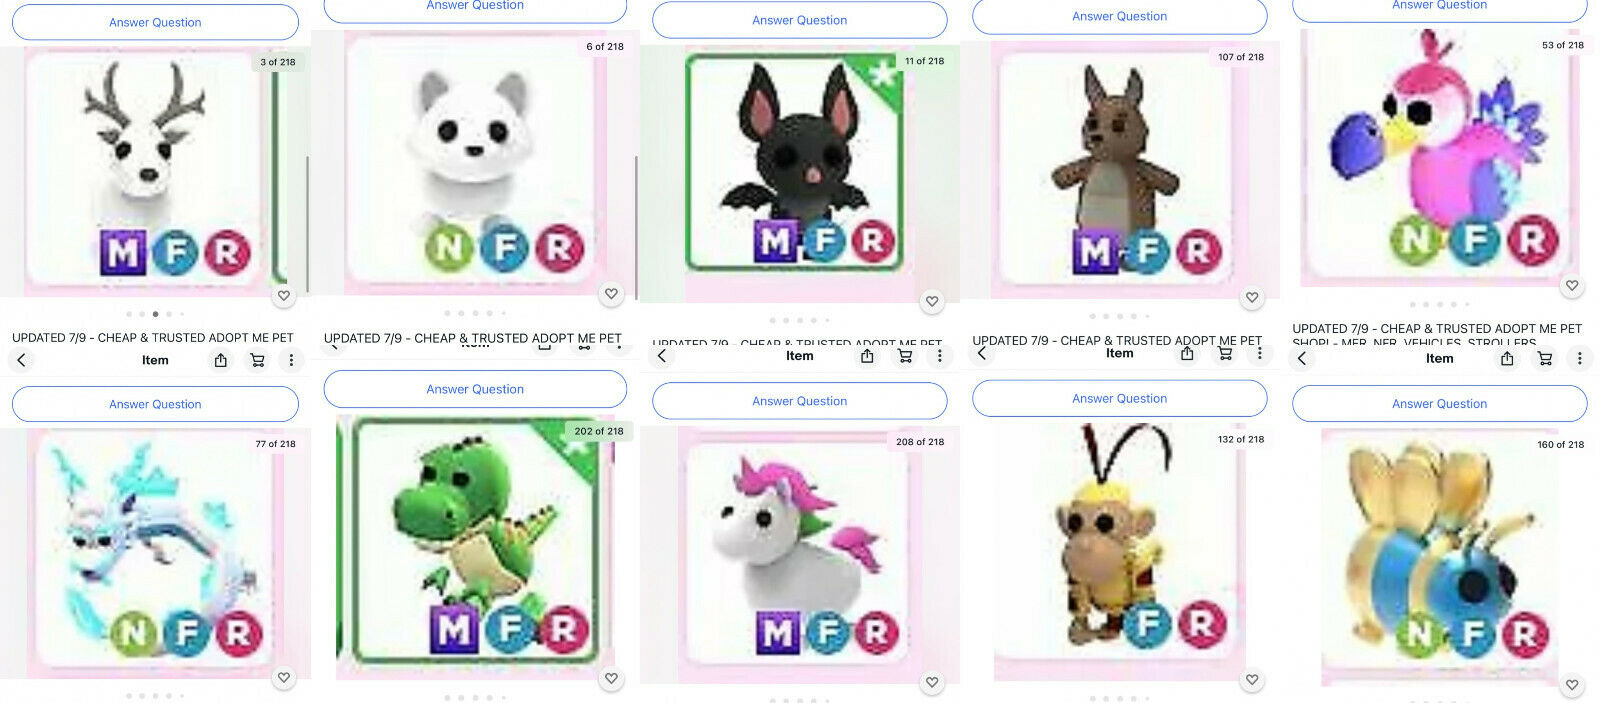 Updated 7/9 - Cheap & Trusted Adopt Me Pet Shop! - Mfr, Nfr, Vehicles, Strollers